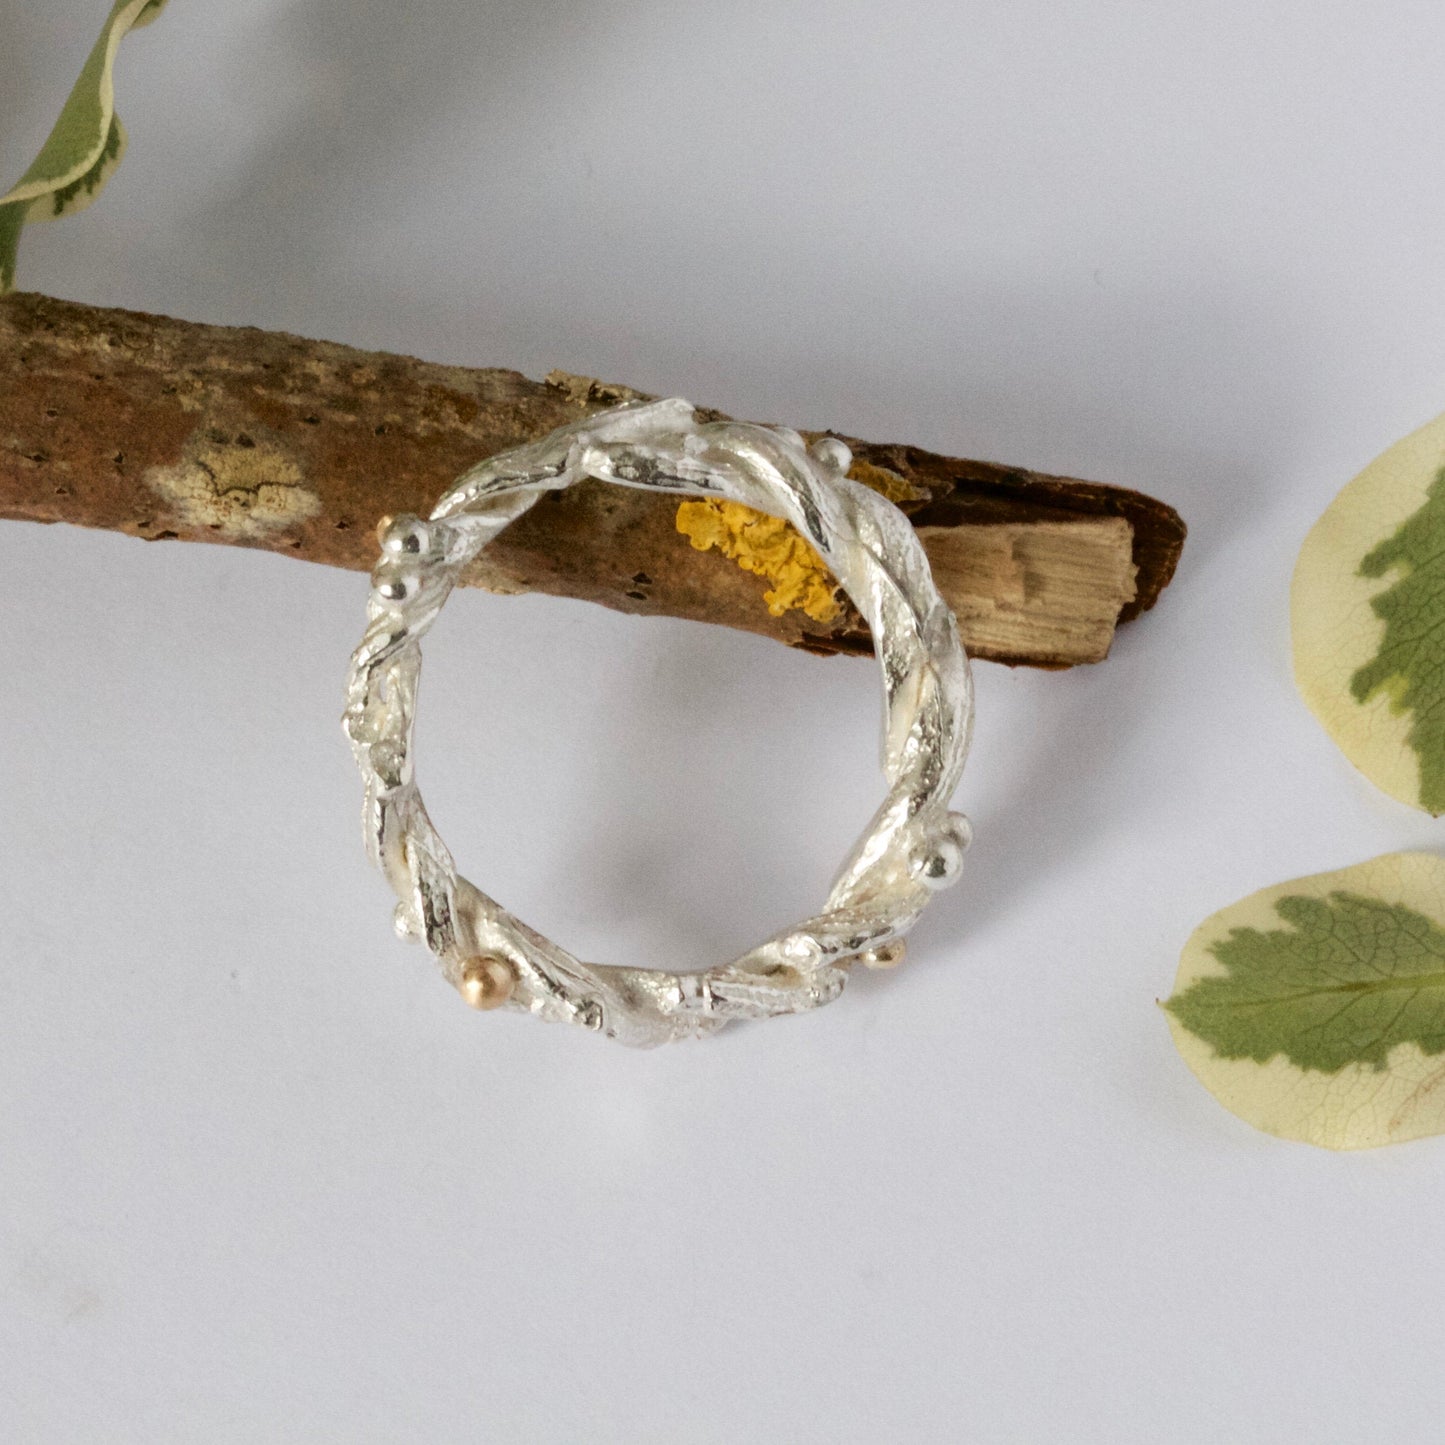 Organic Silver Band Ring-Entwined Forest Twig Ring-Alternative Wedding Ring